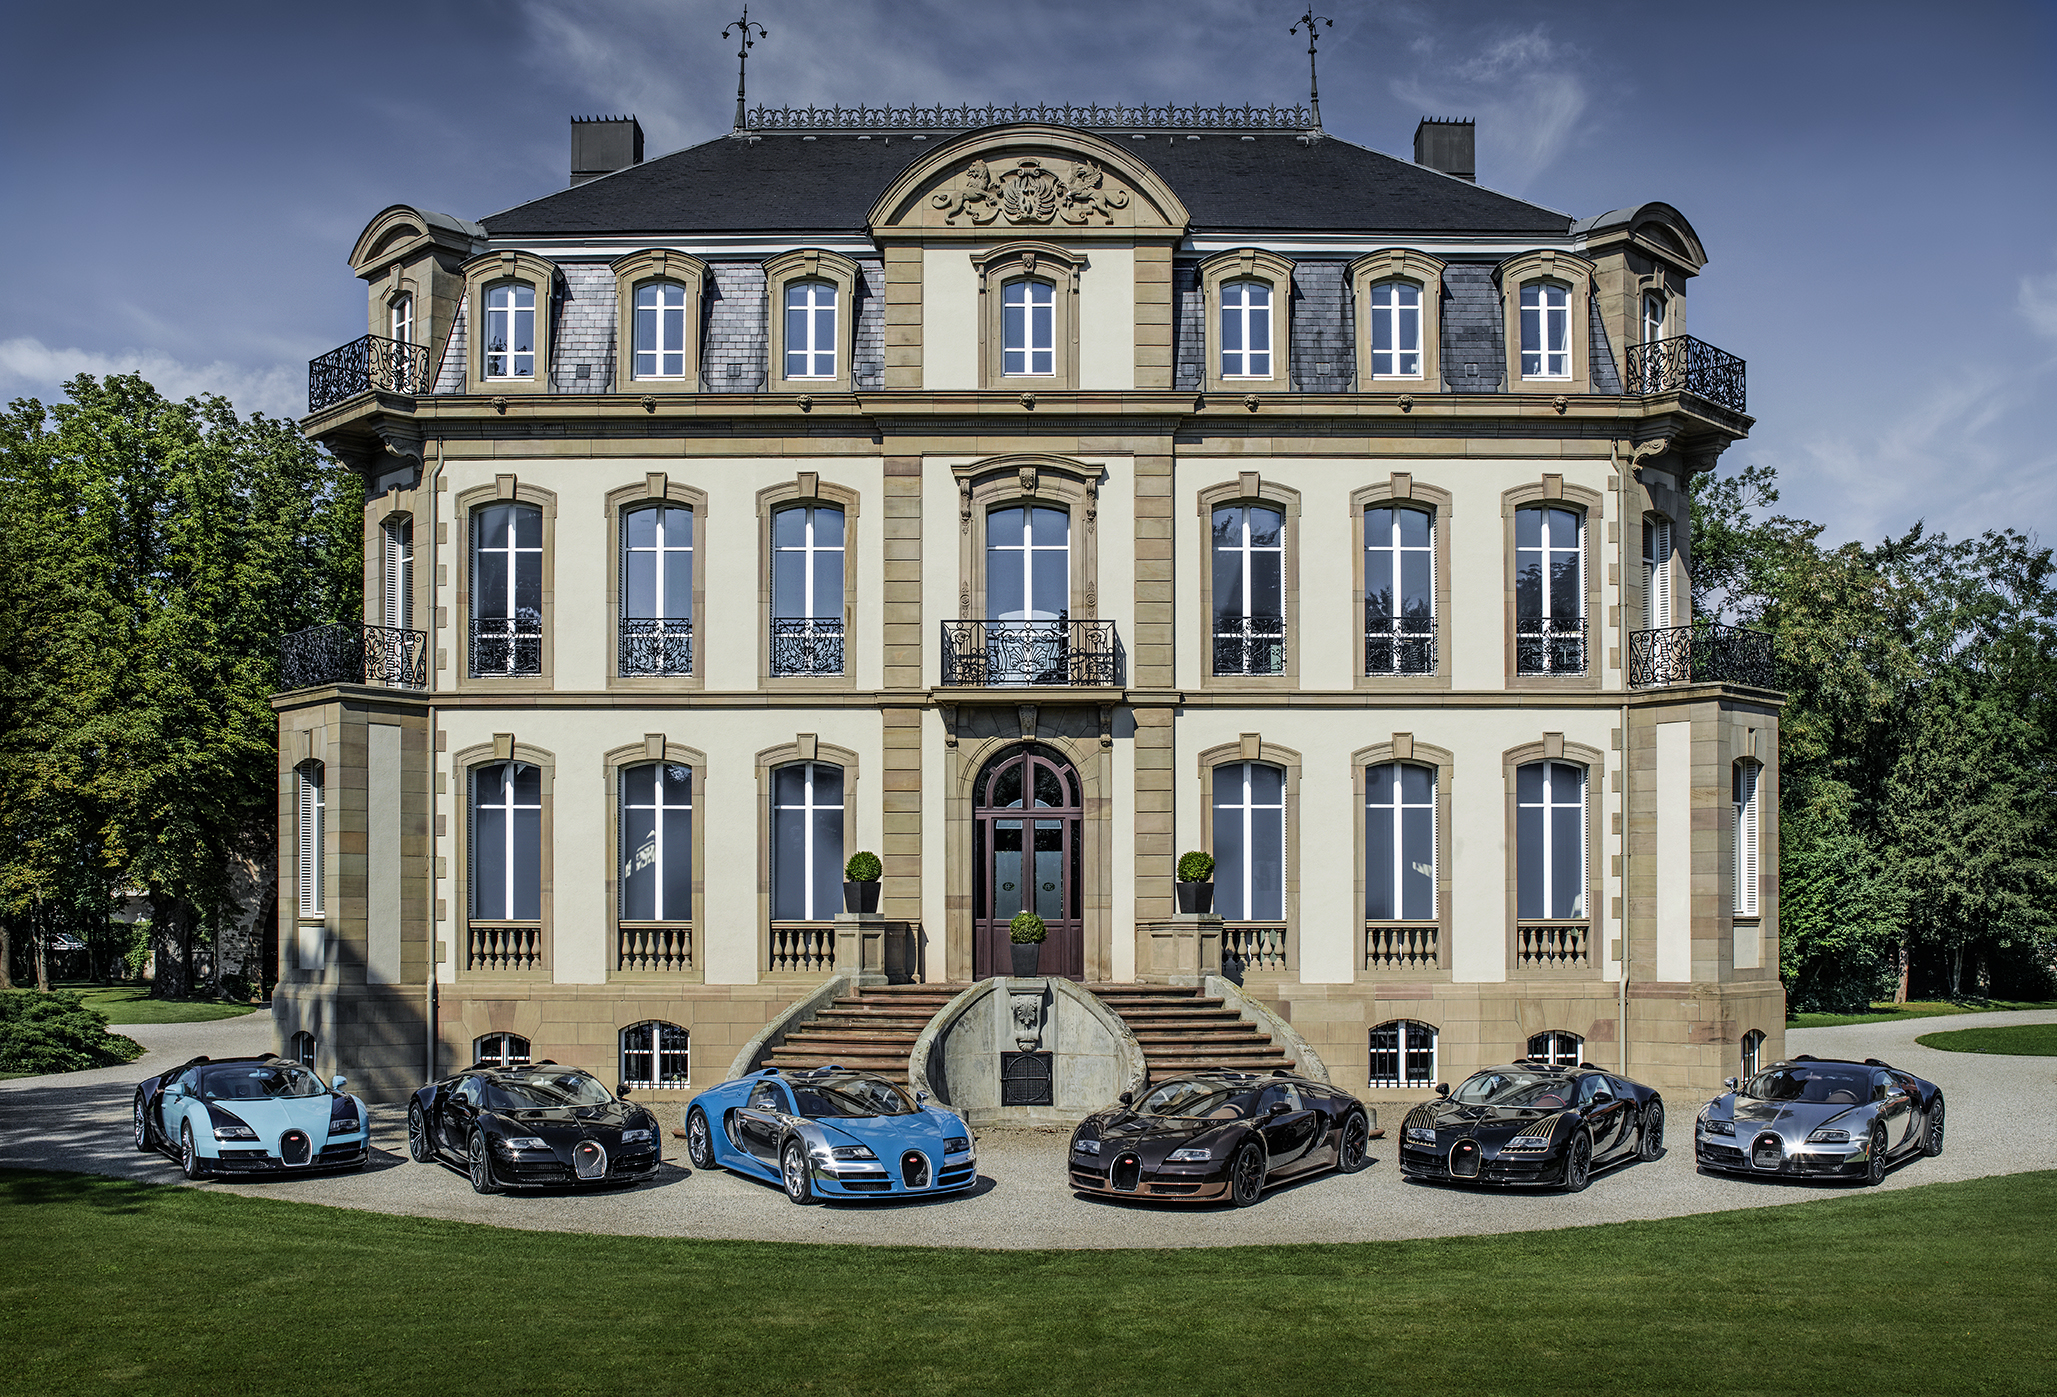 The six Legends at the Bugatti headquarters in Molsheim, France. All 18 vehicles have been sold.